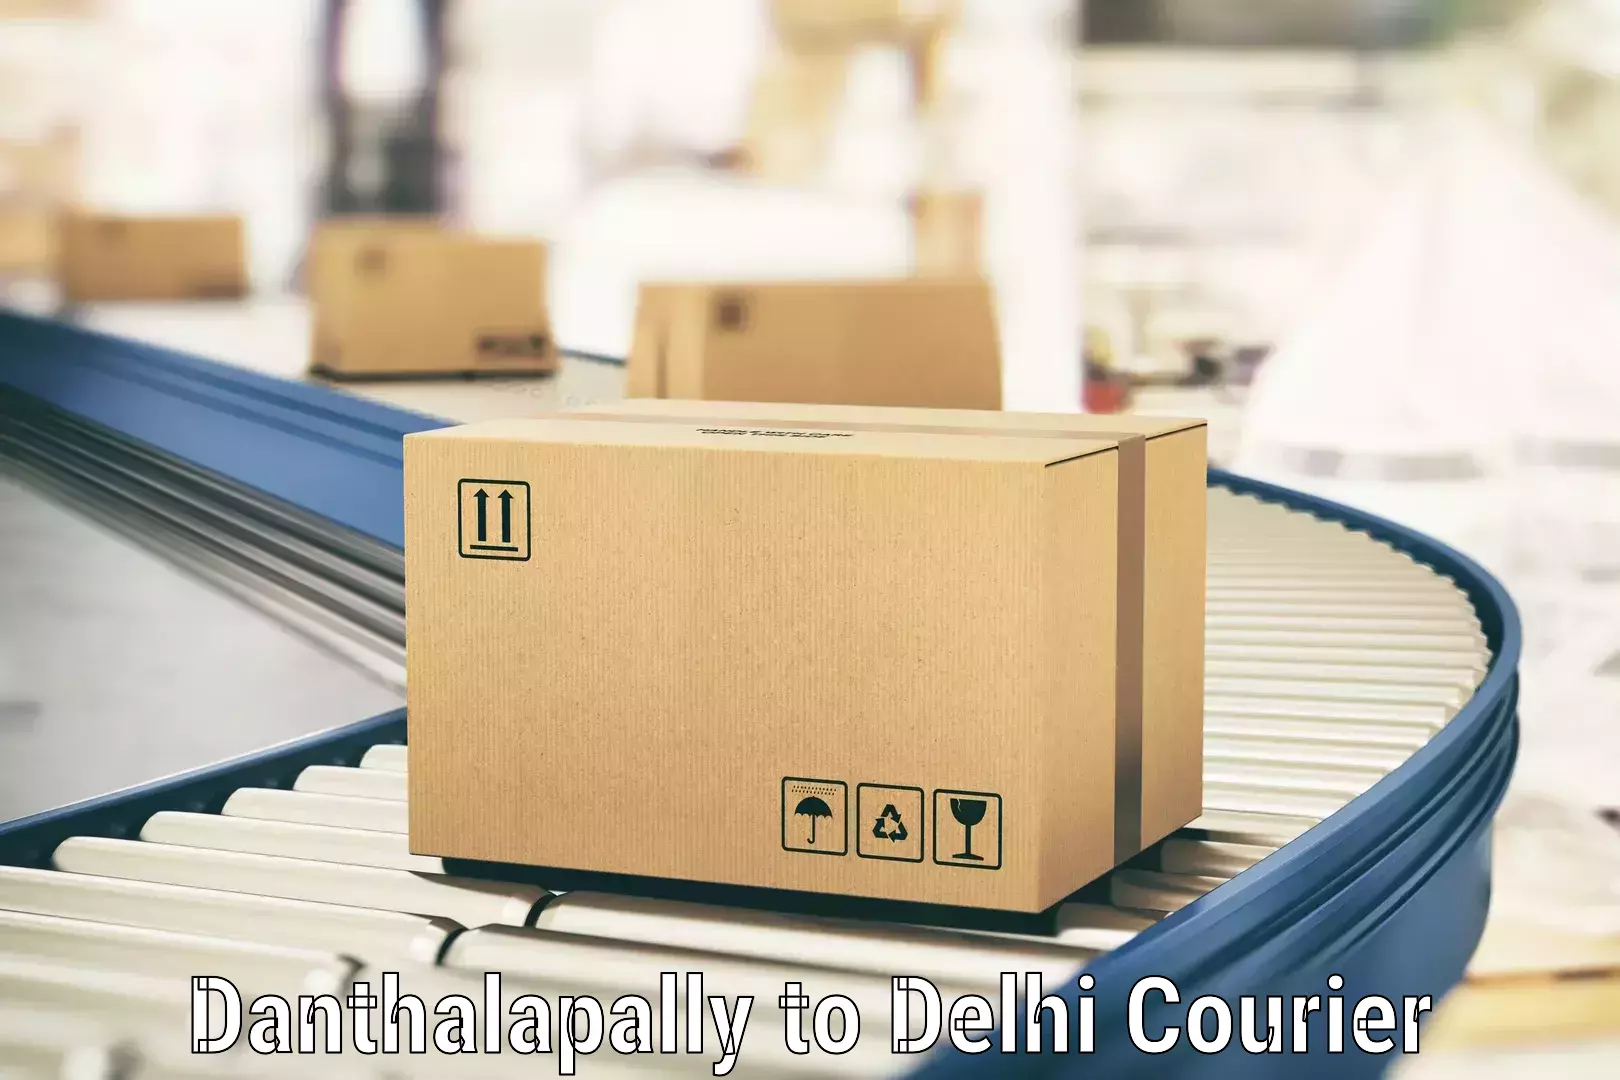 State-of-the-art courier technology Danthalapally to Delhi